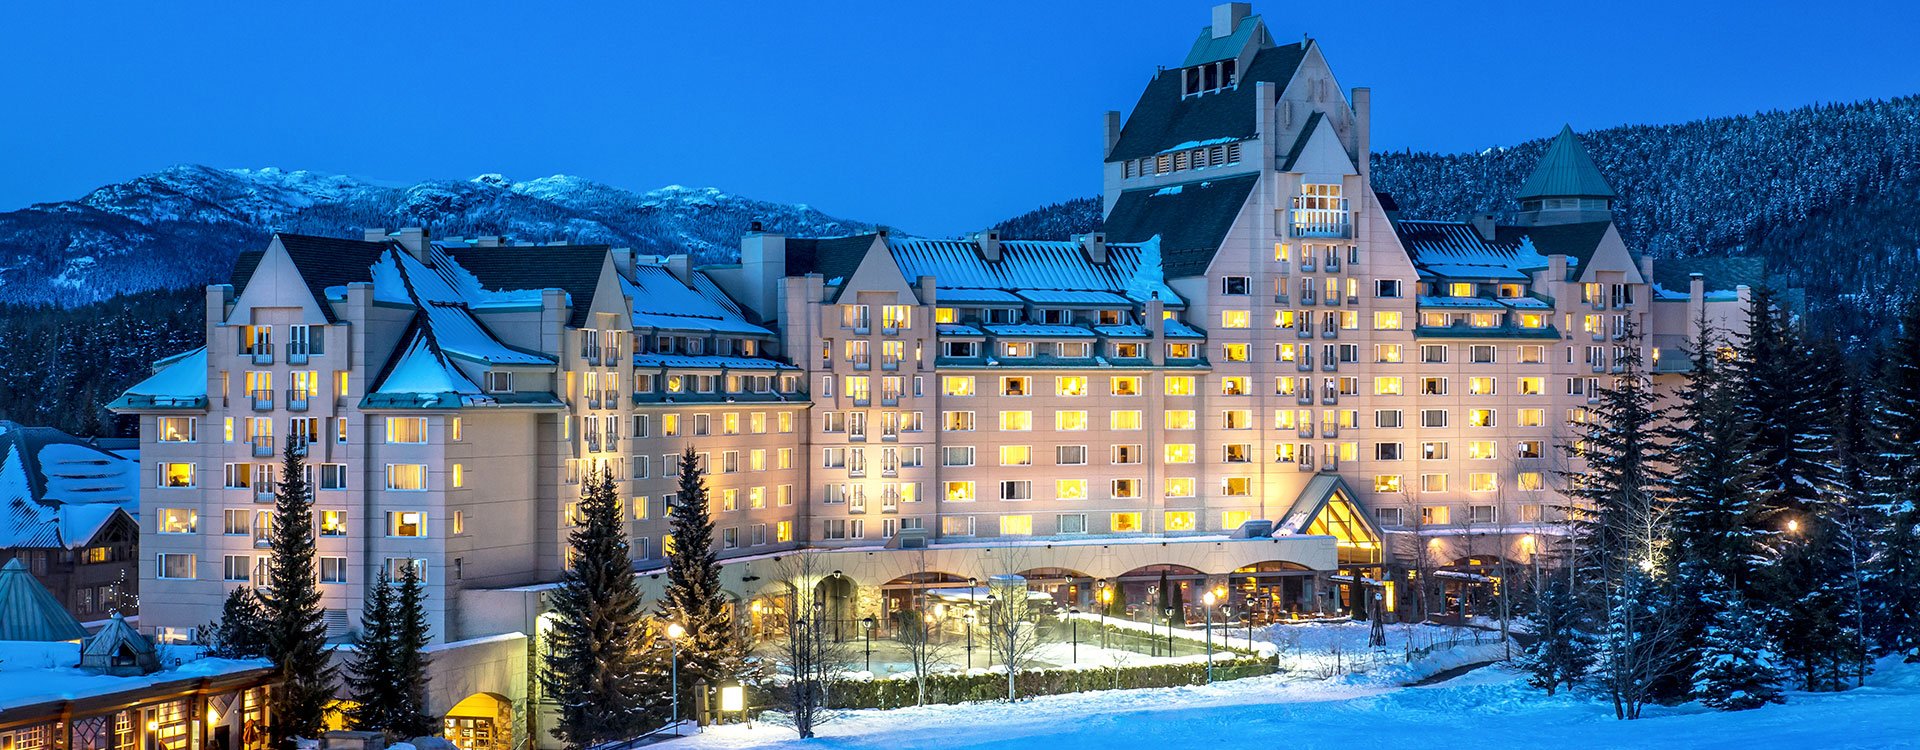 Fairmont Chateau Whistler_Front Out